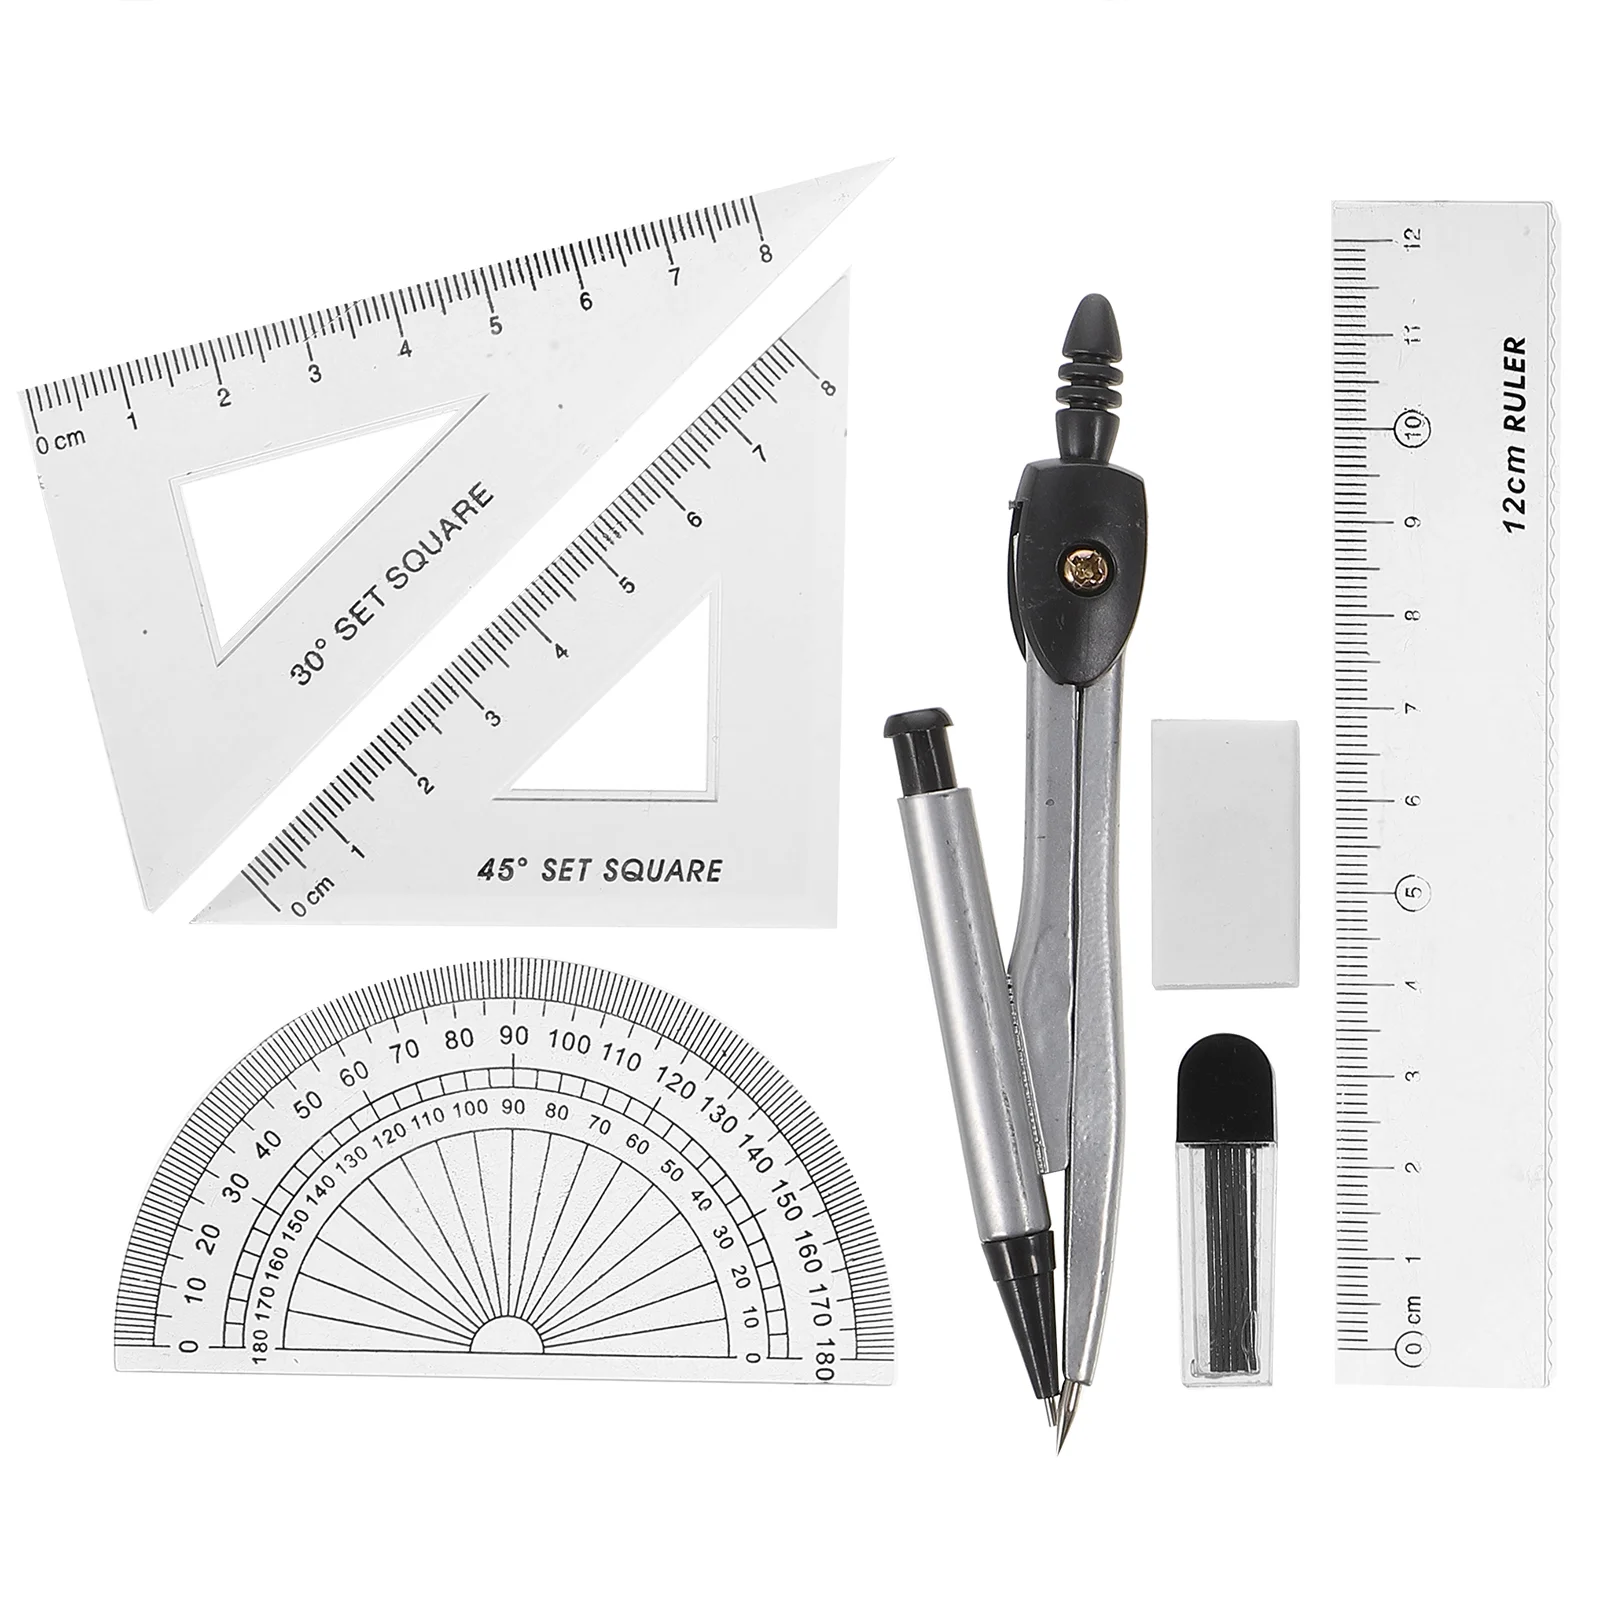 

Math Drawing Compass Student Supplies with Storage Box, Includes Compasses, Rulers, Protractor, Eraser, Refills, for Drafting